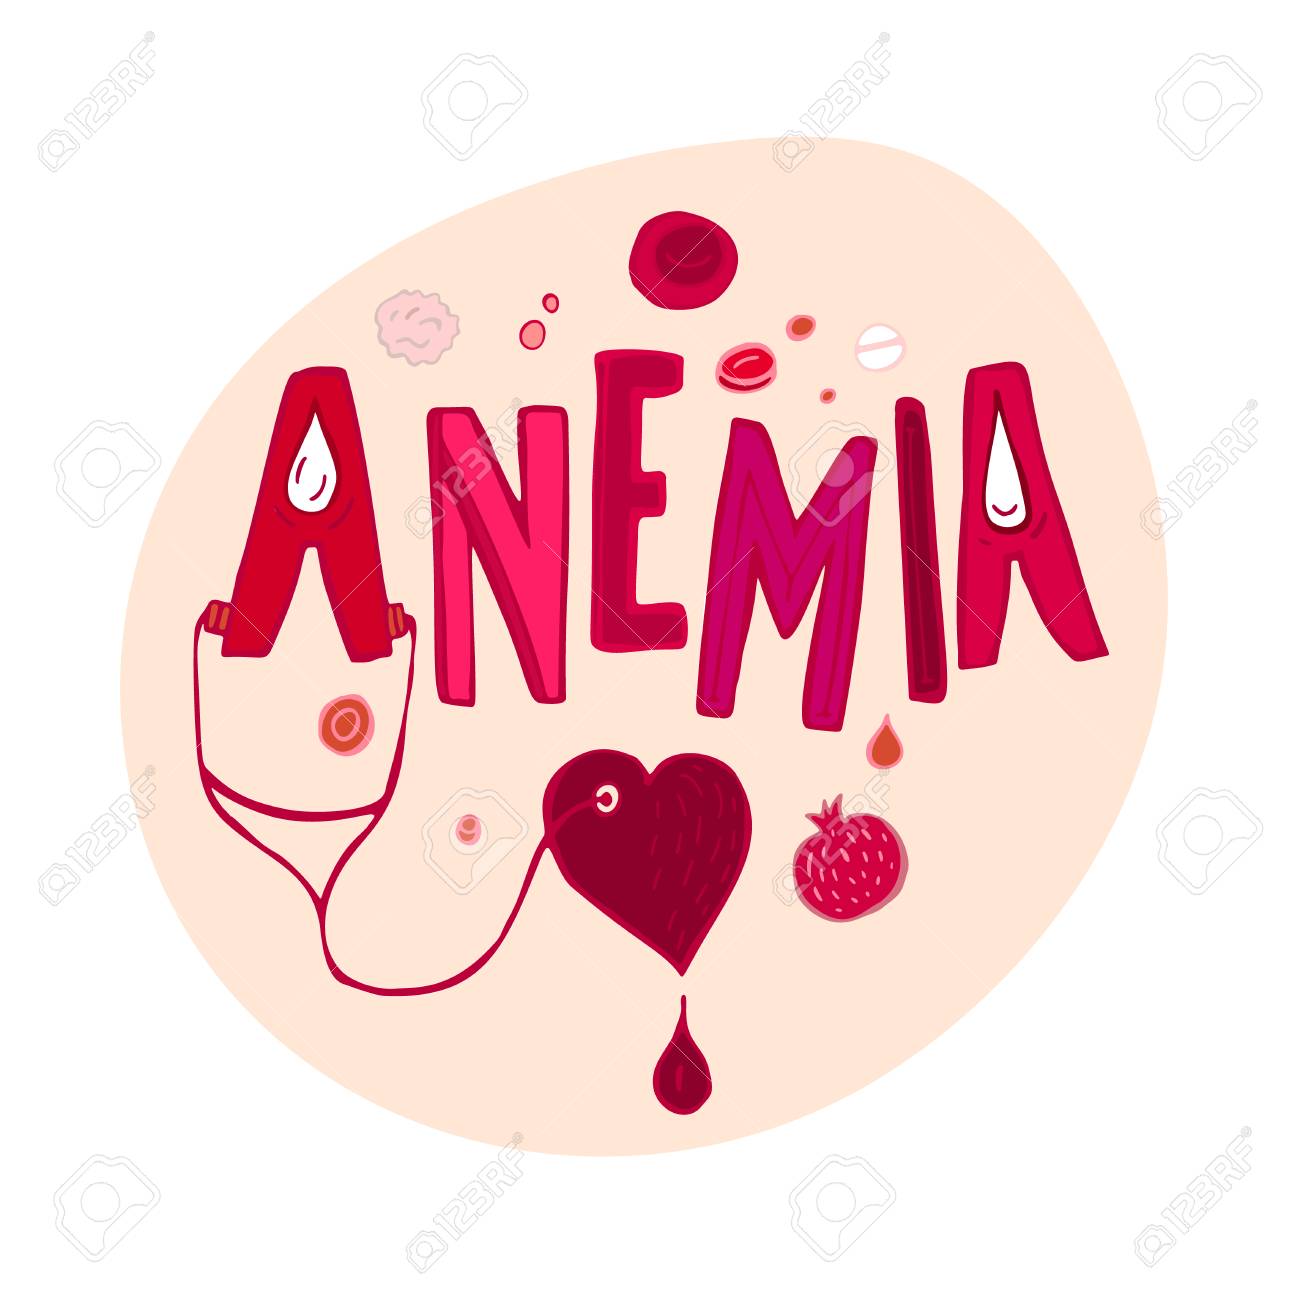 Creative Anemia Background With Lettering In Doodle Style Hand